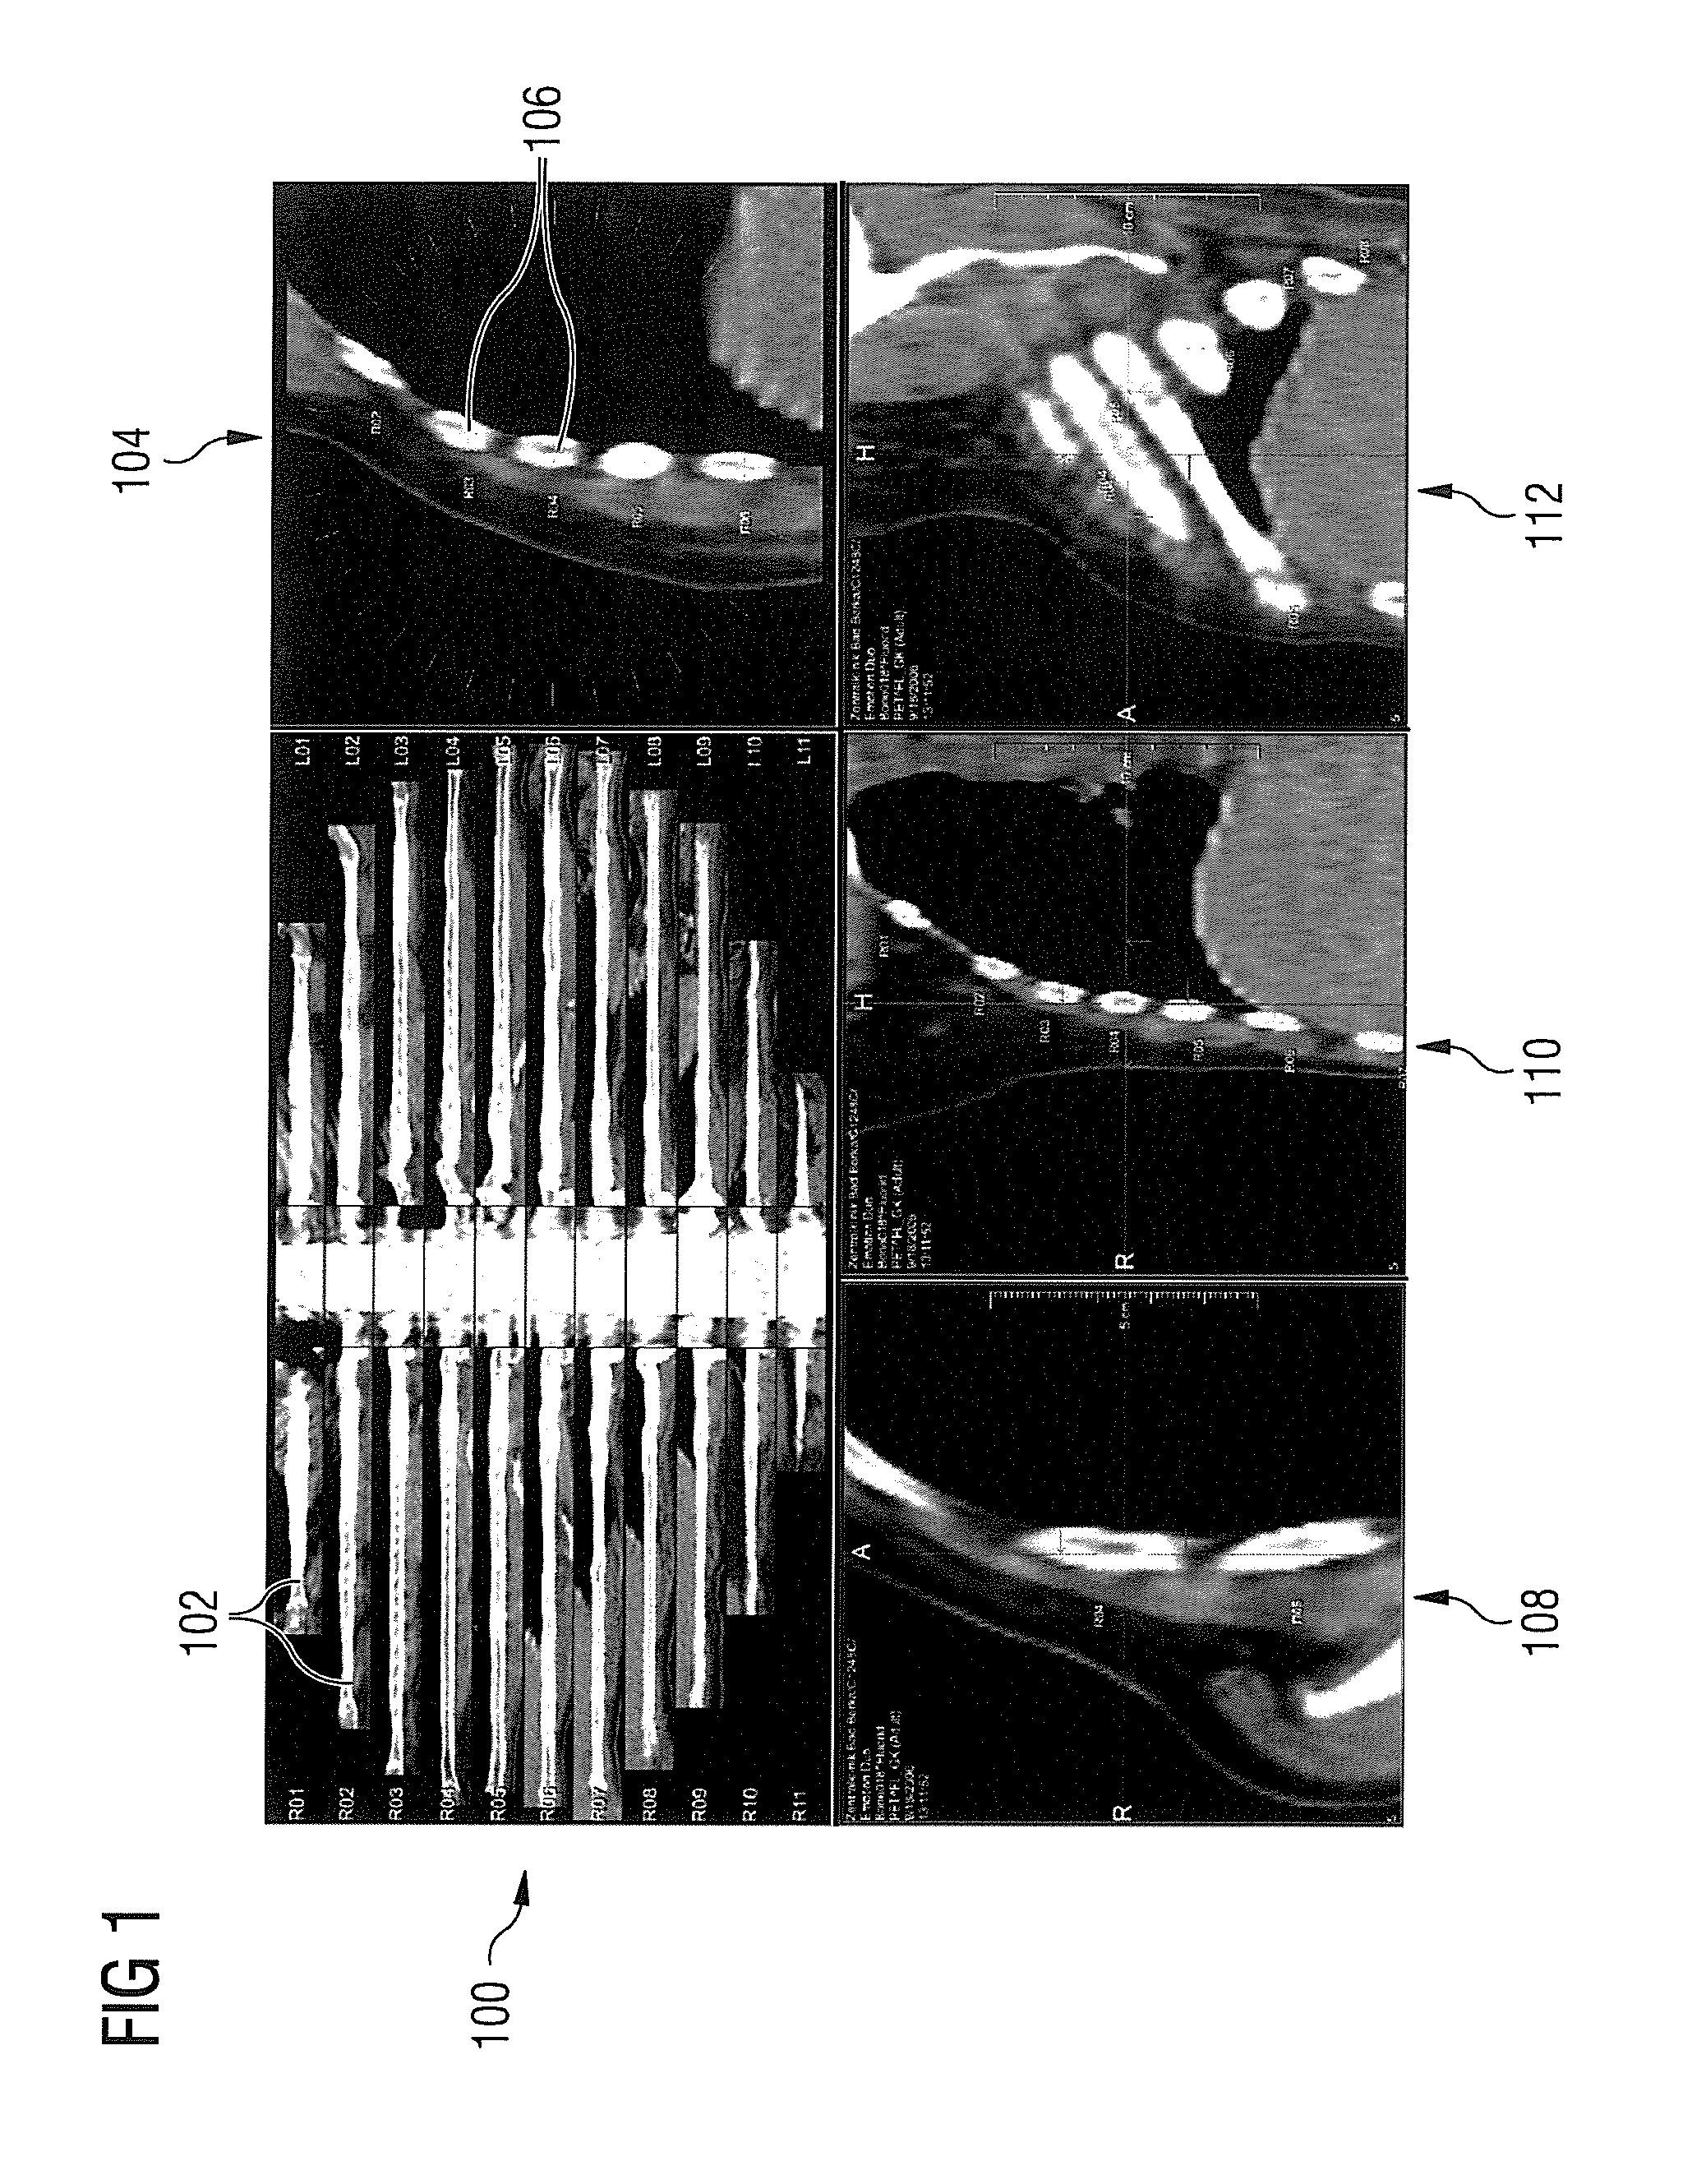 Method and apparatus for generating an enhanced image from medical imaging data